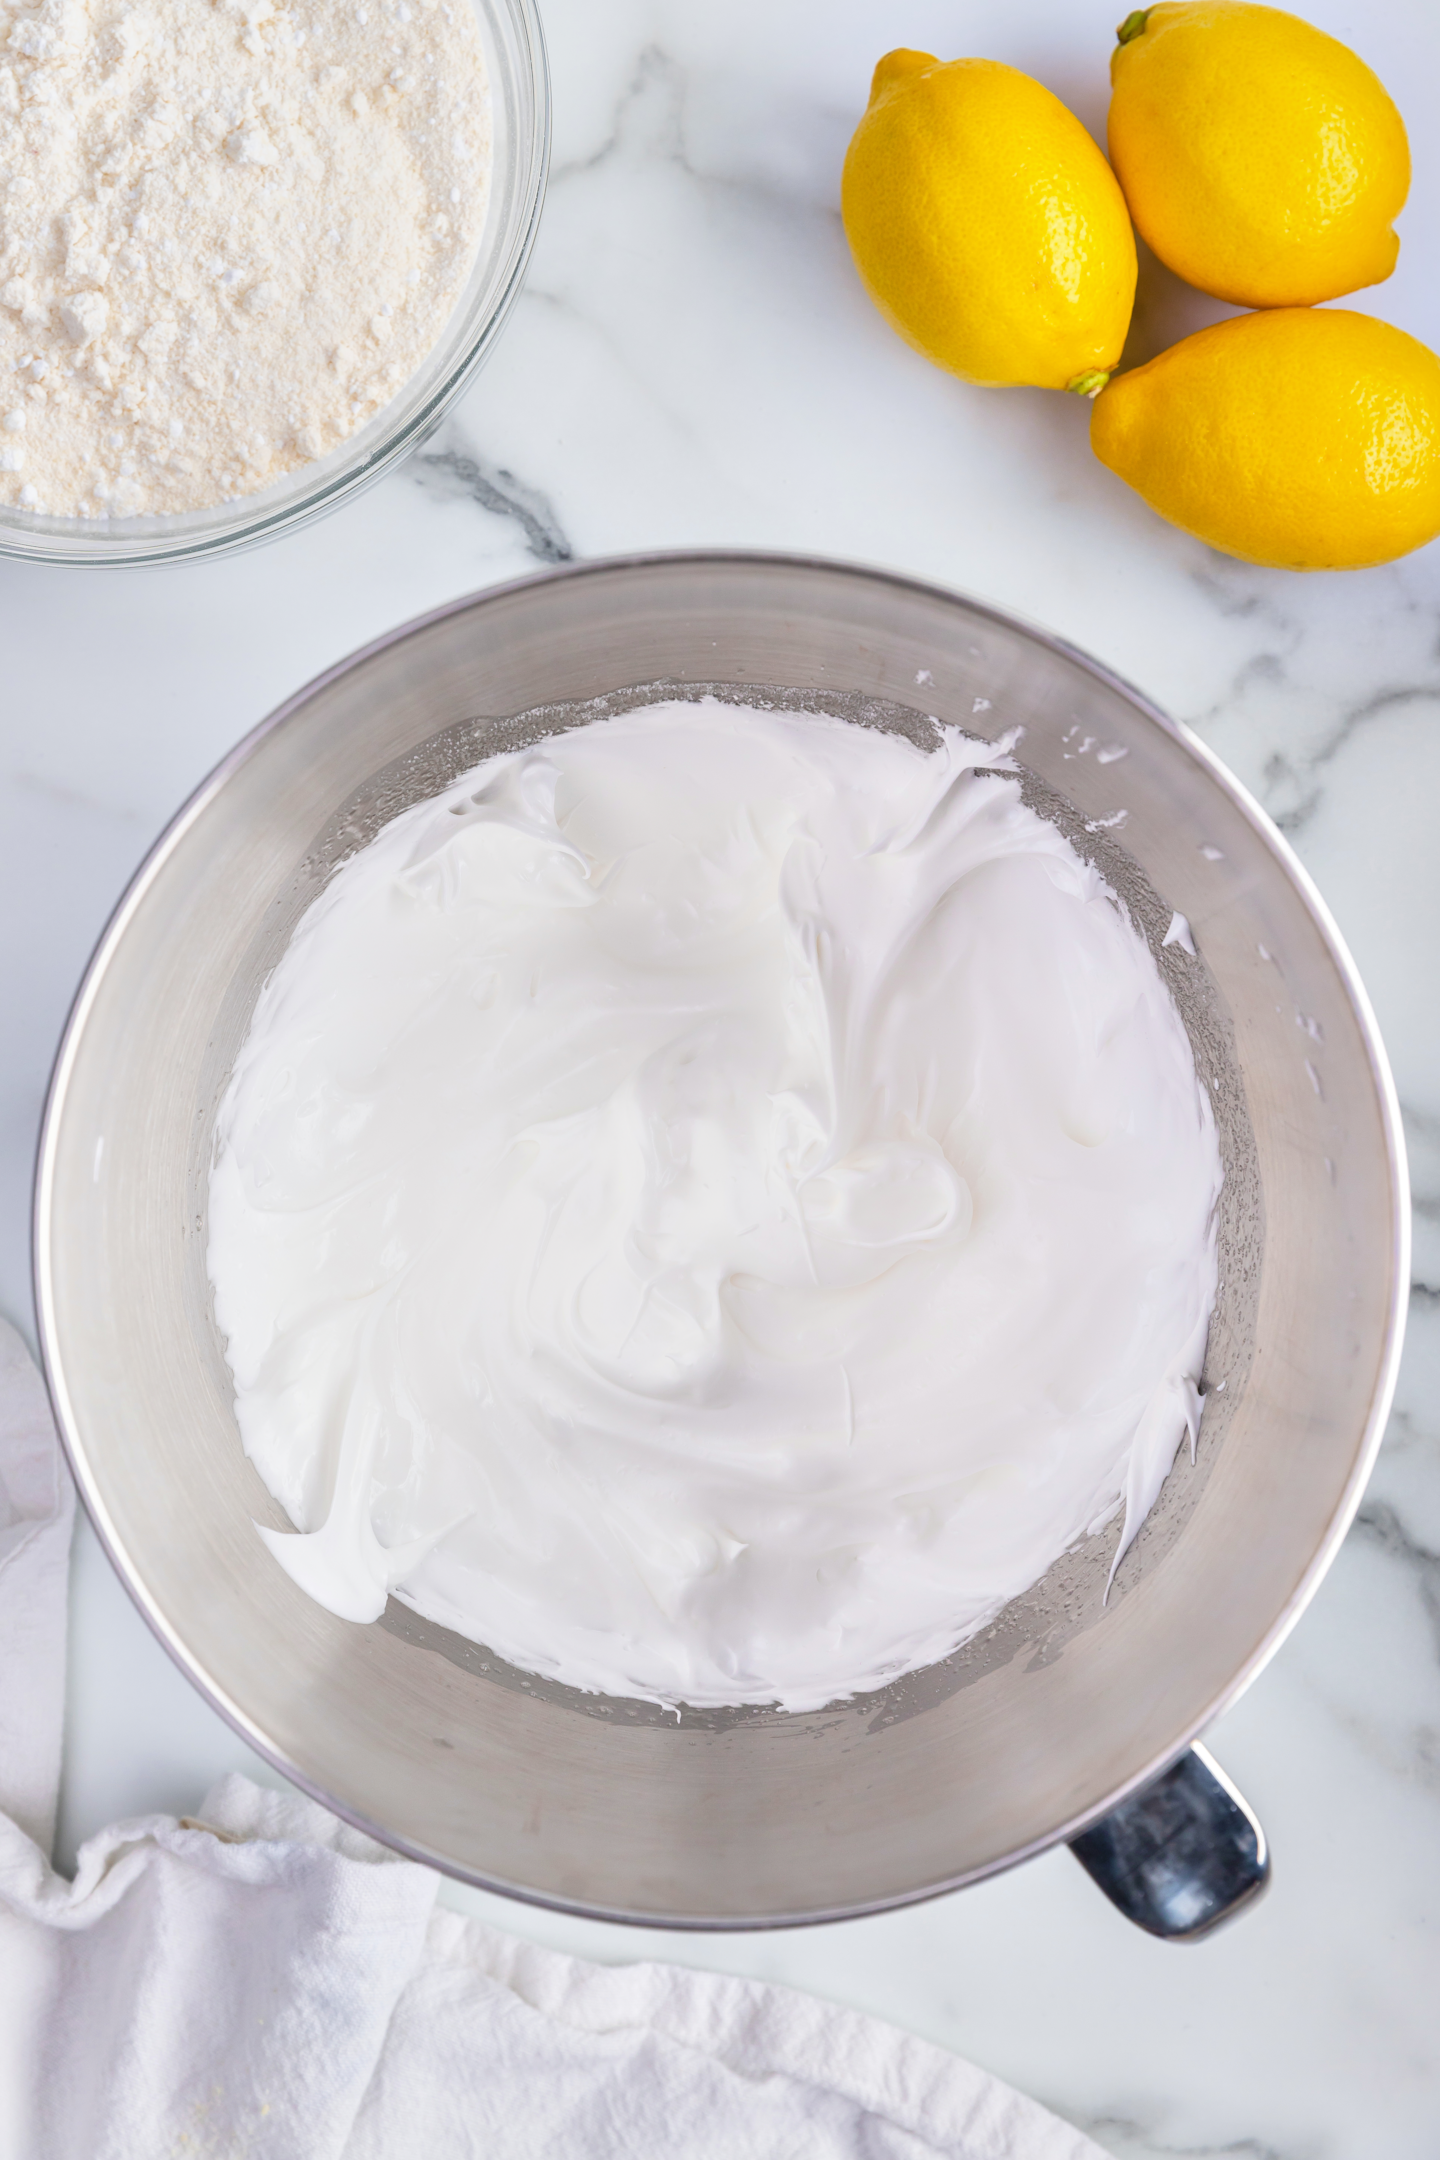 whipped egg whites and sugar into a meringue in a bowl